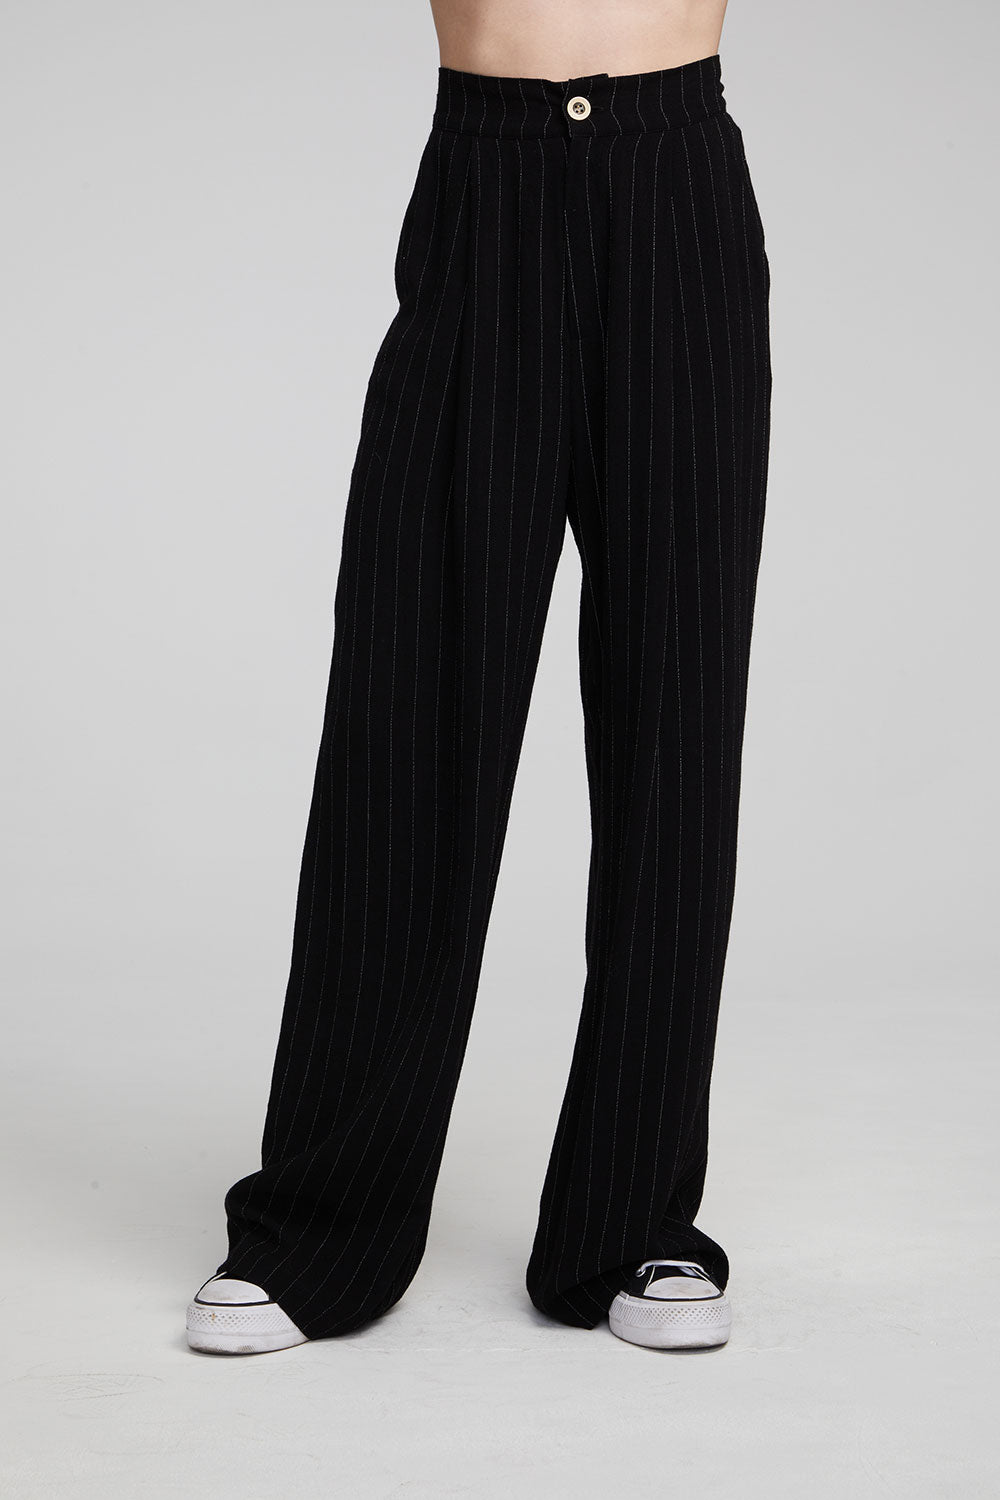 Theo Beverly Pinstripe Trousers WOMENS chaserbrand